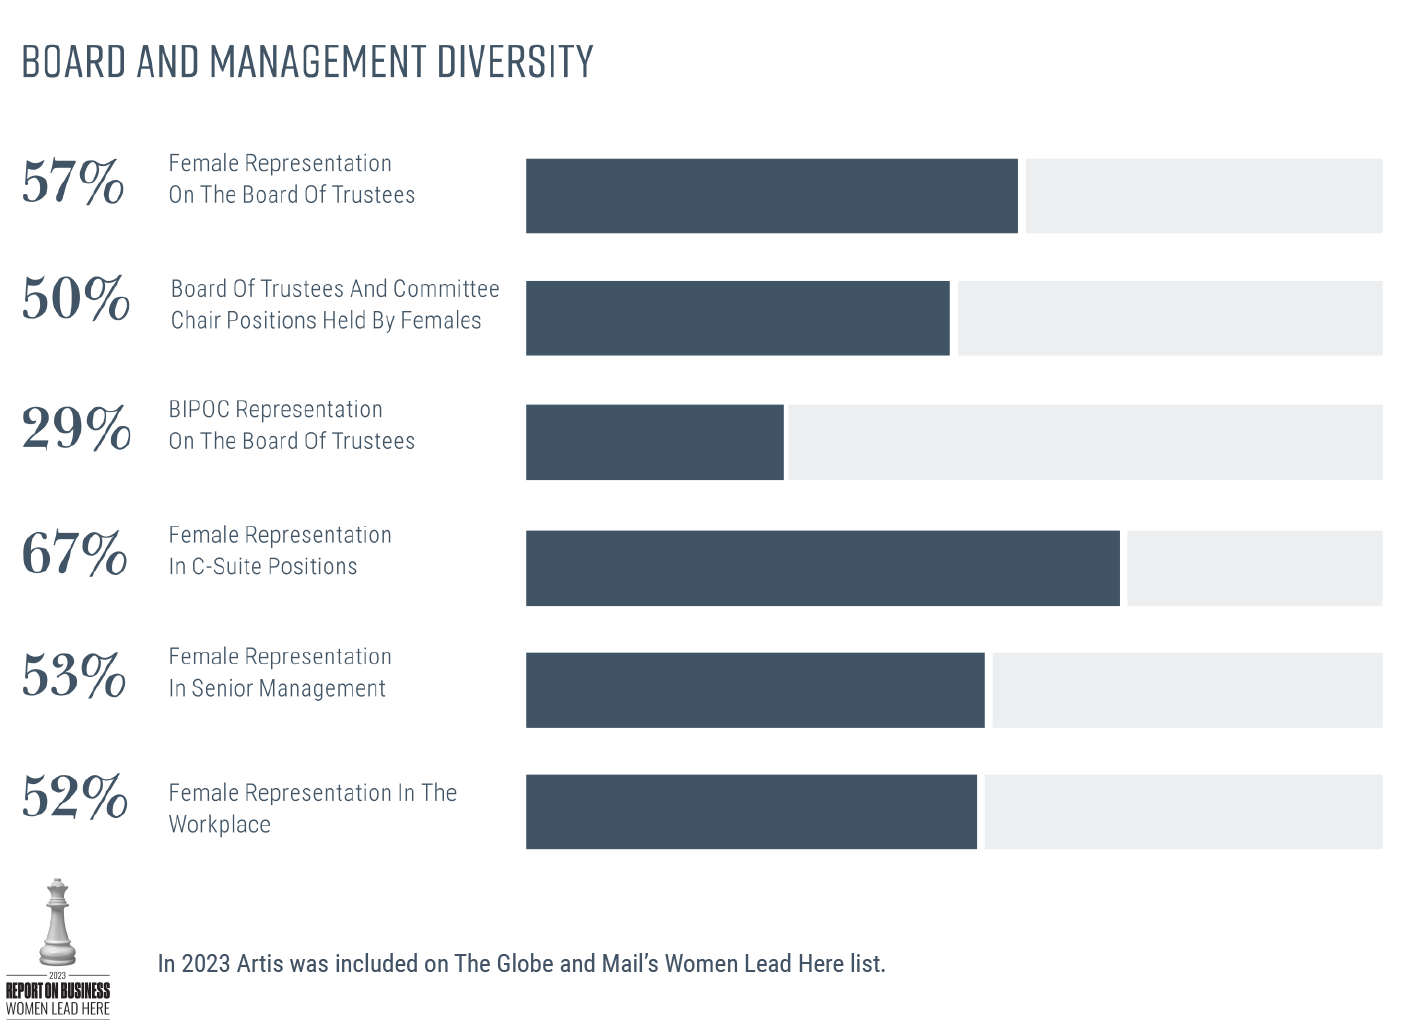 Board and Management Diversity